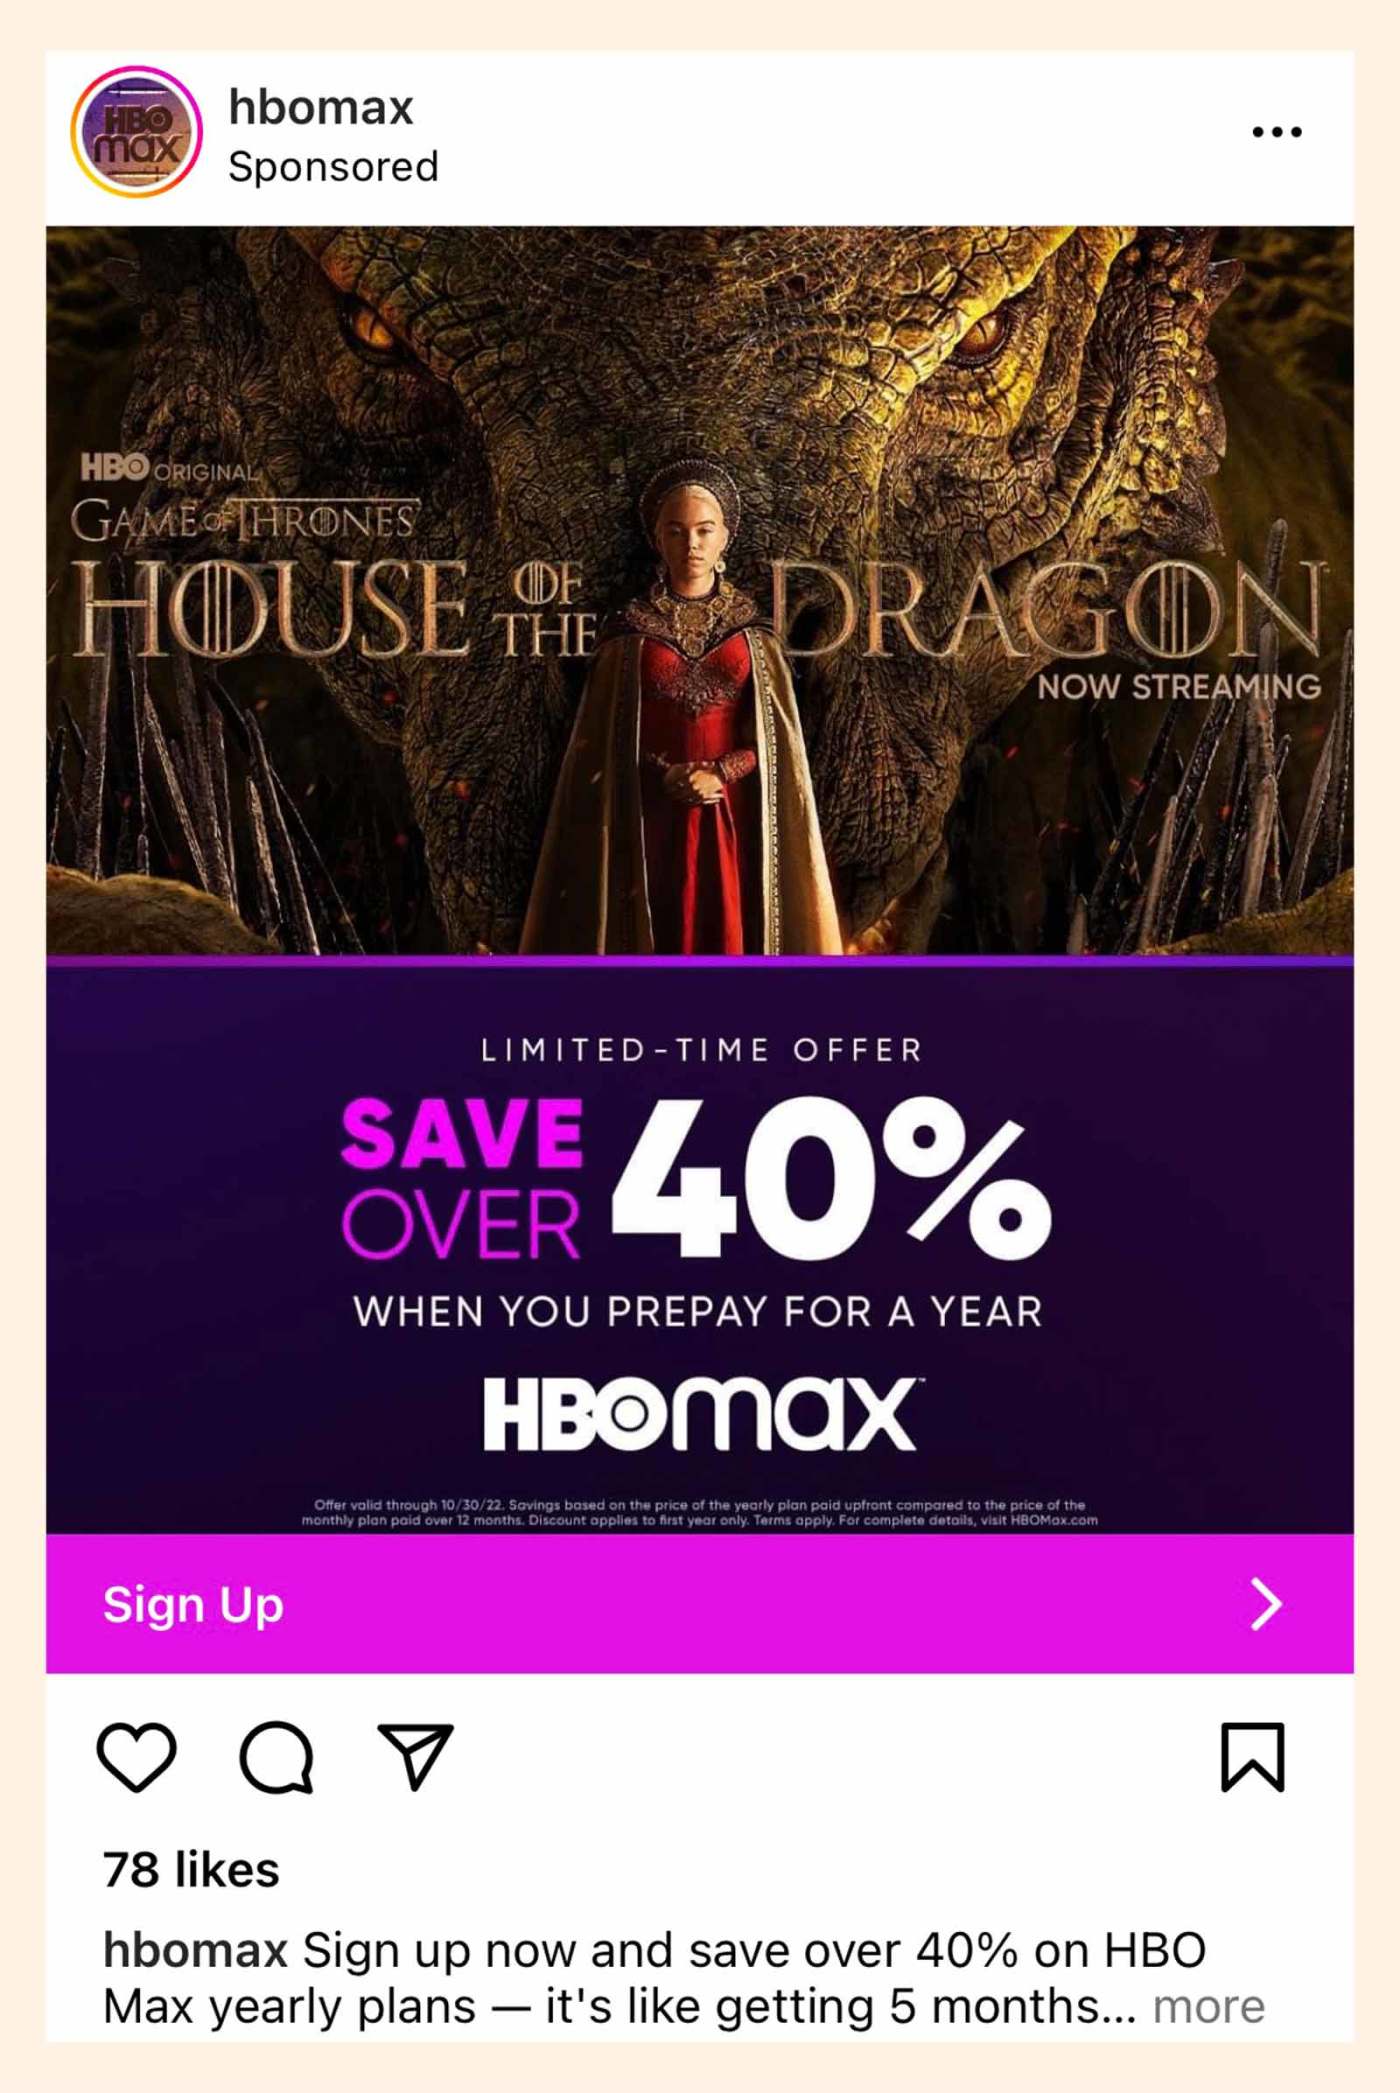 HBO Max House of Dragon sponsored ad on Instagram